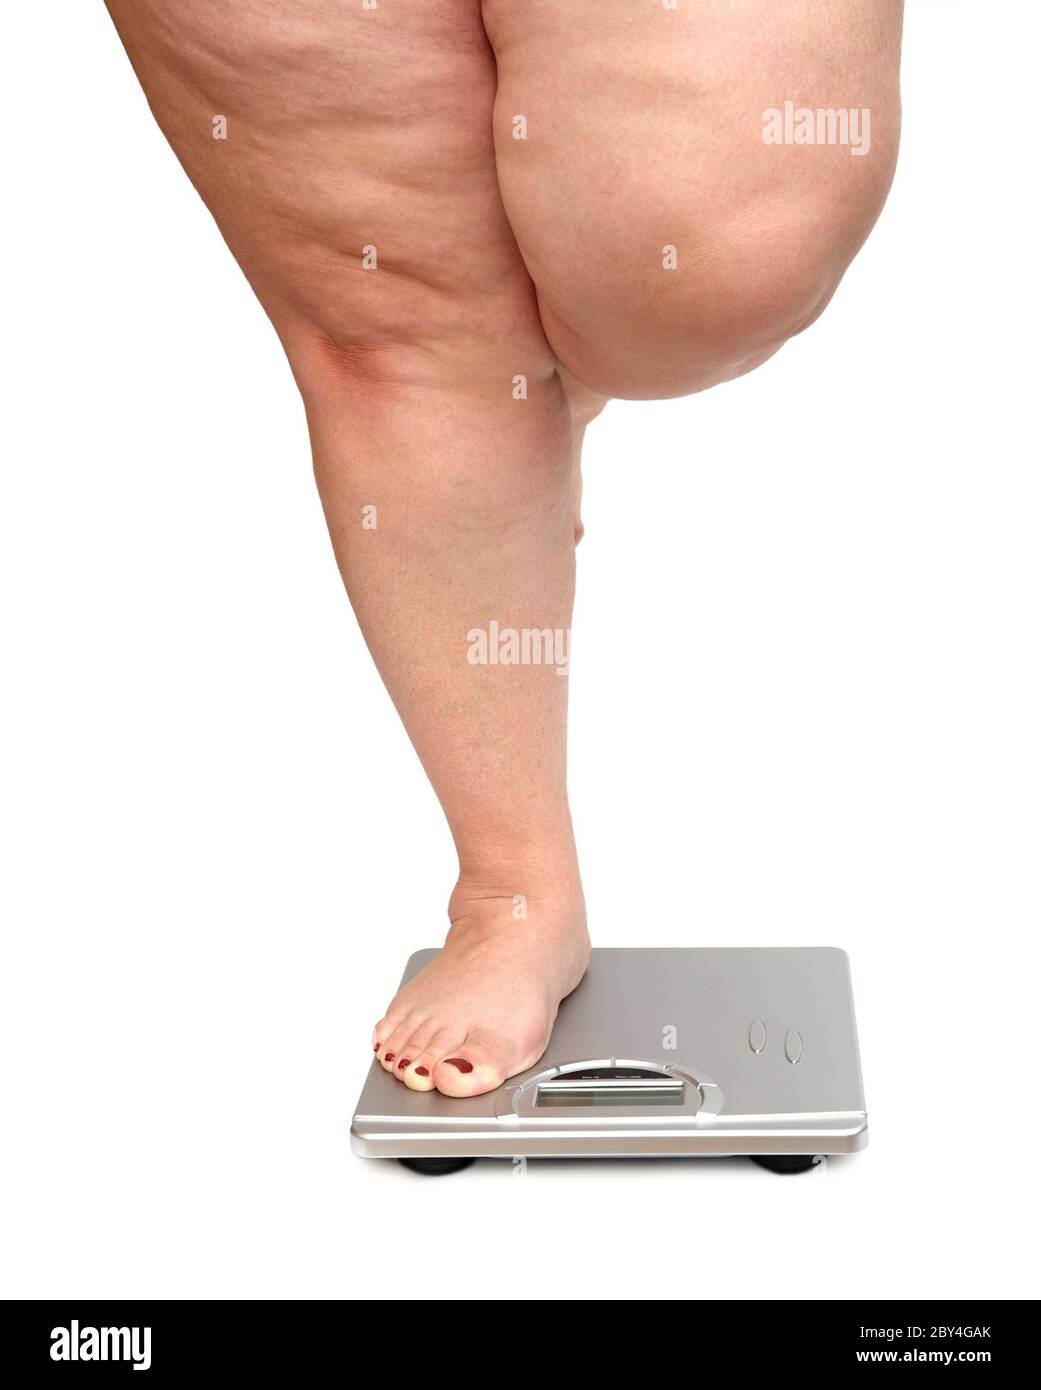 women legs with overweight Stock Photo